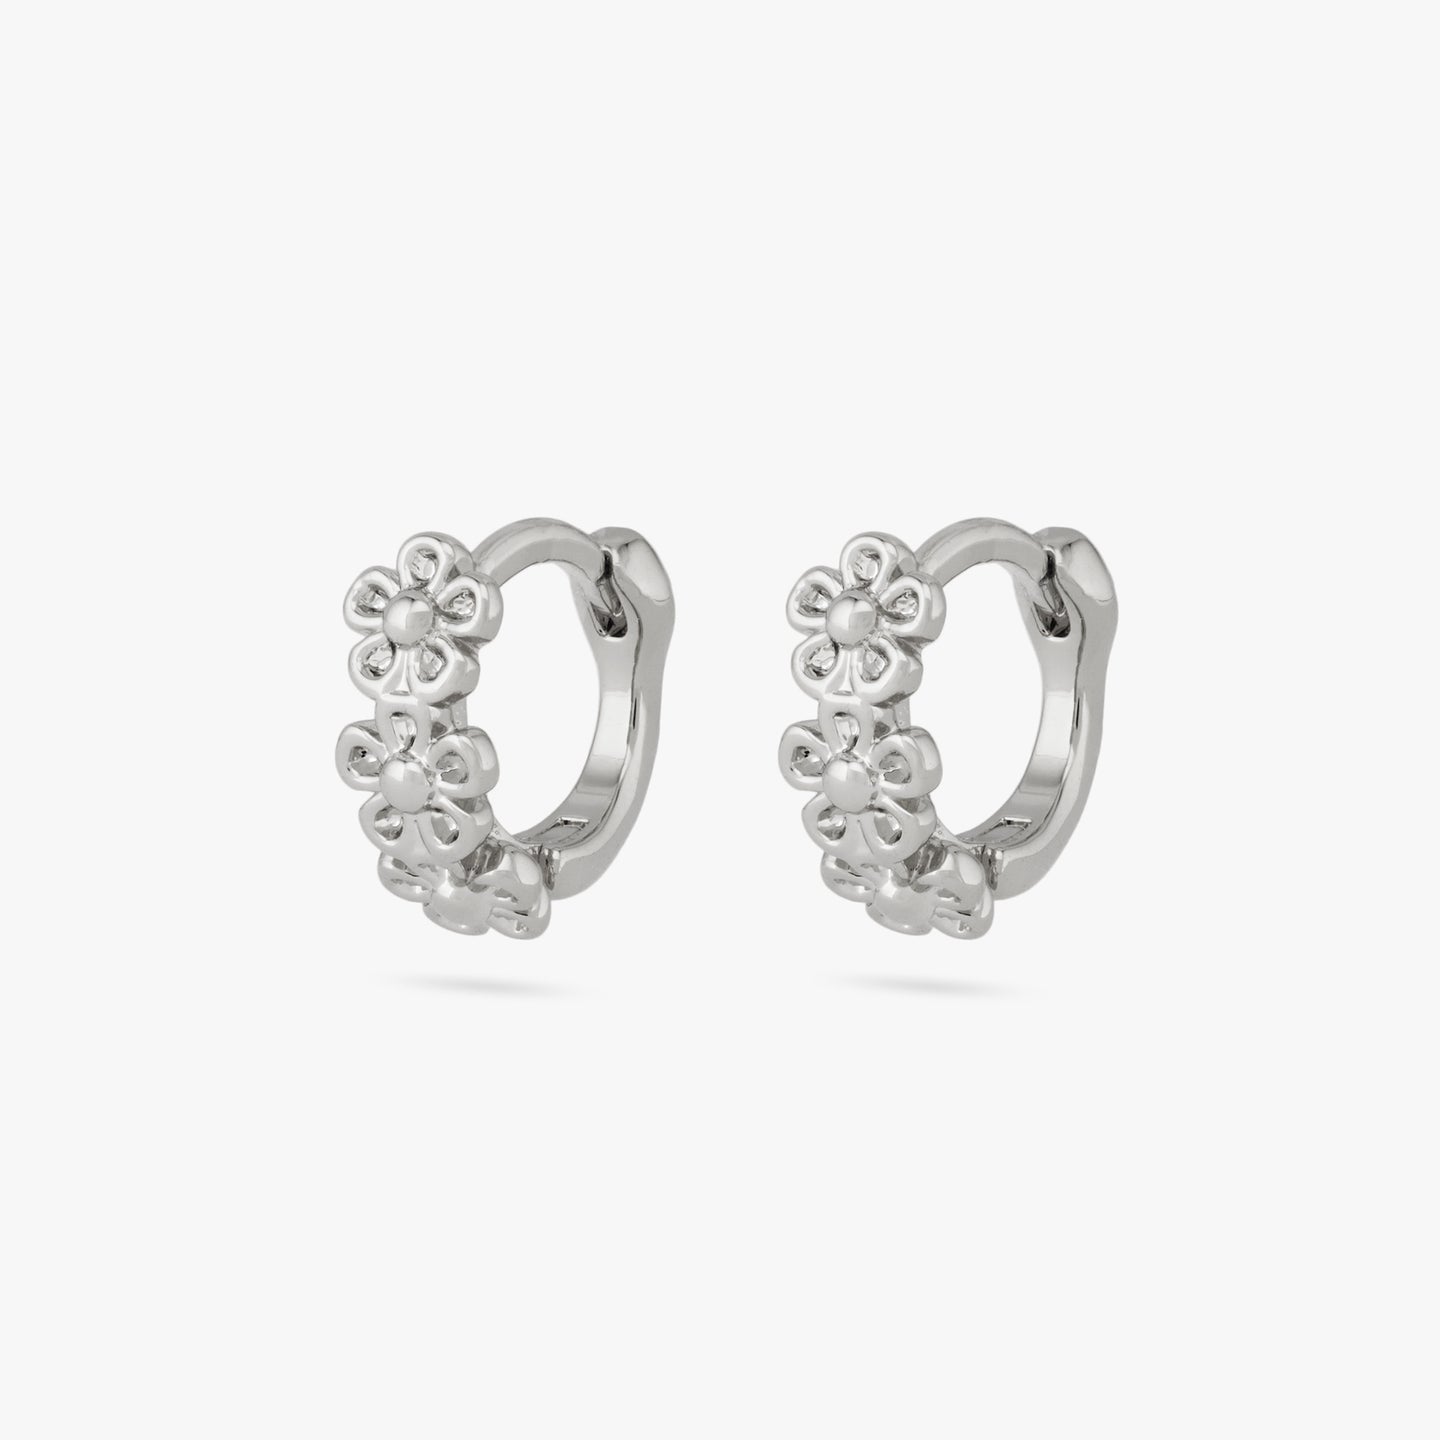 This is a pair of three small silver daisy-shaped flowers on micro huggies [pair] color:null|silver